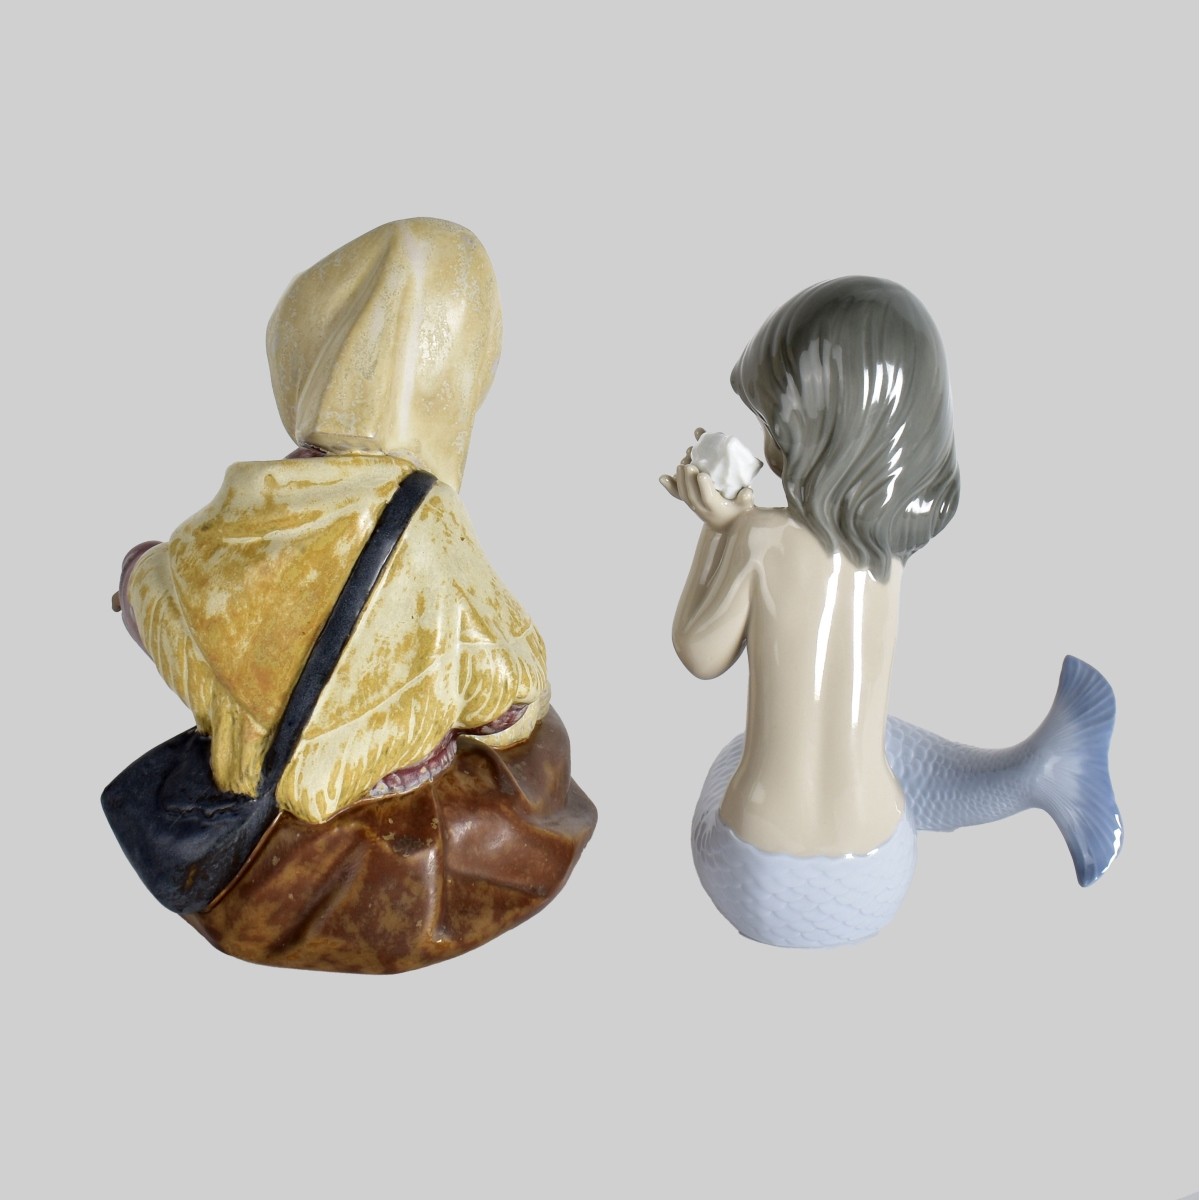 Grouping of Two Figurines